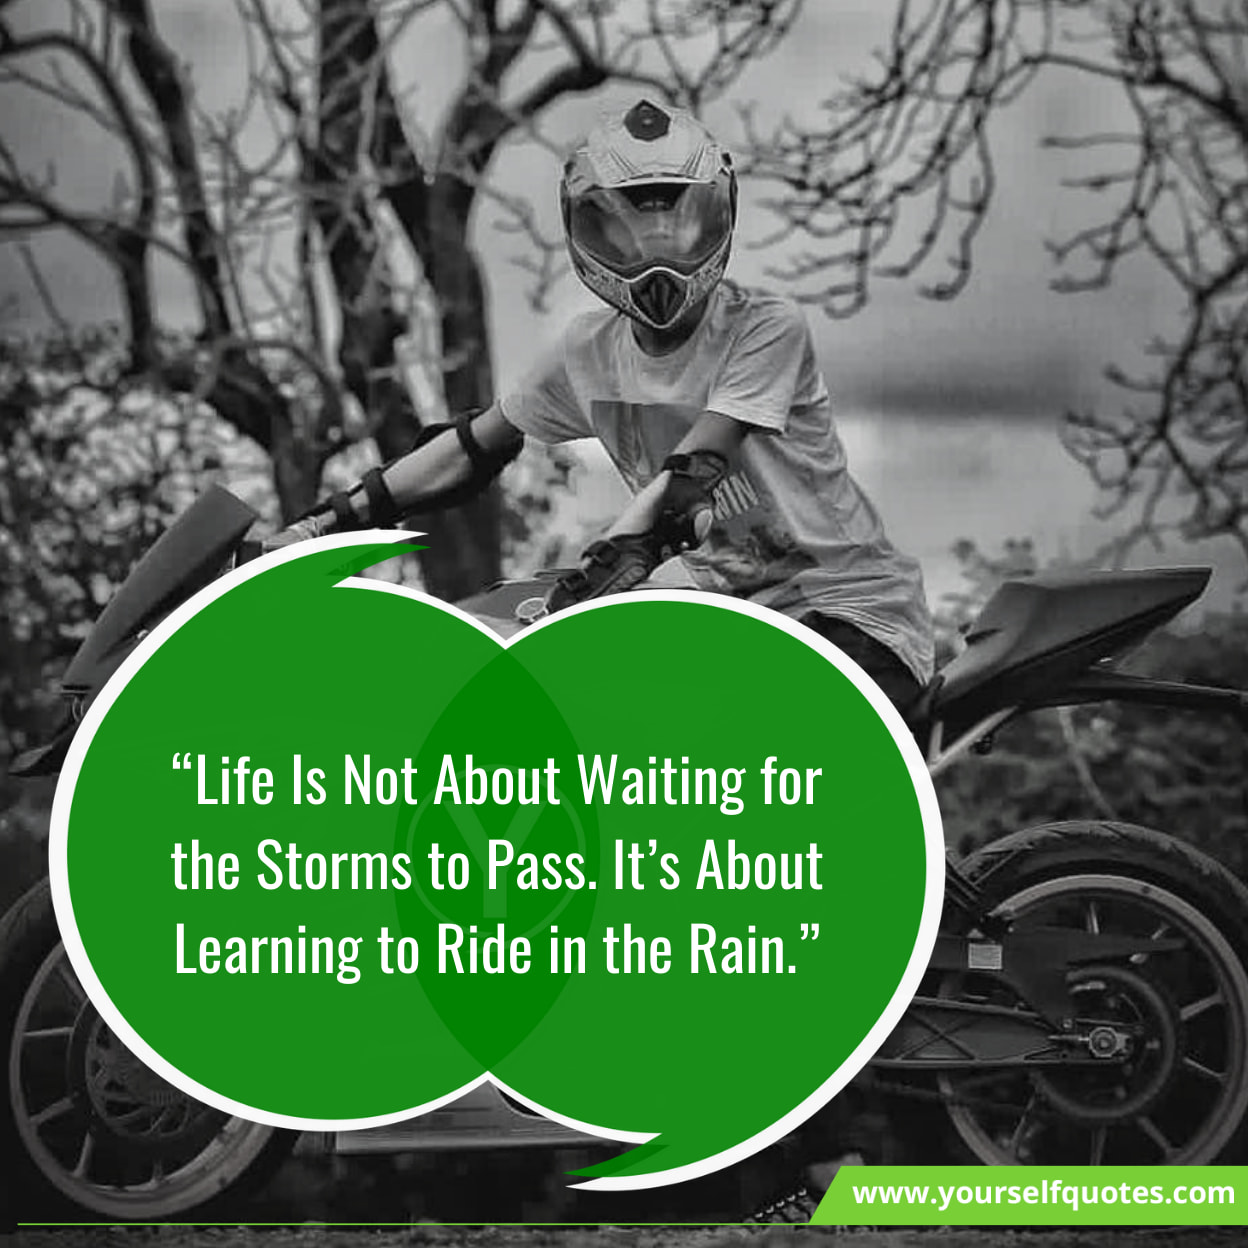 Inspiring Rider Quotes About Life